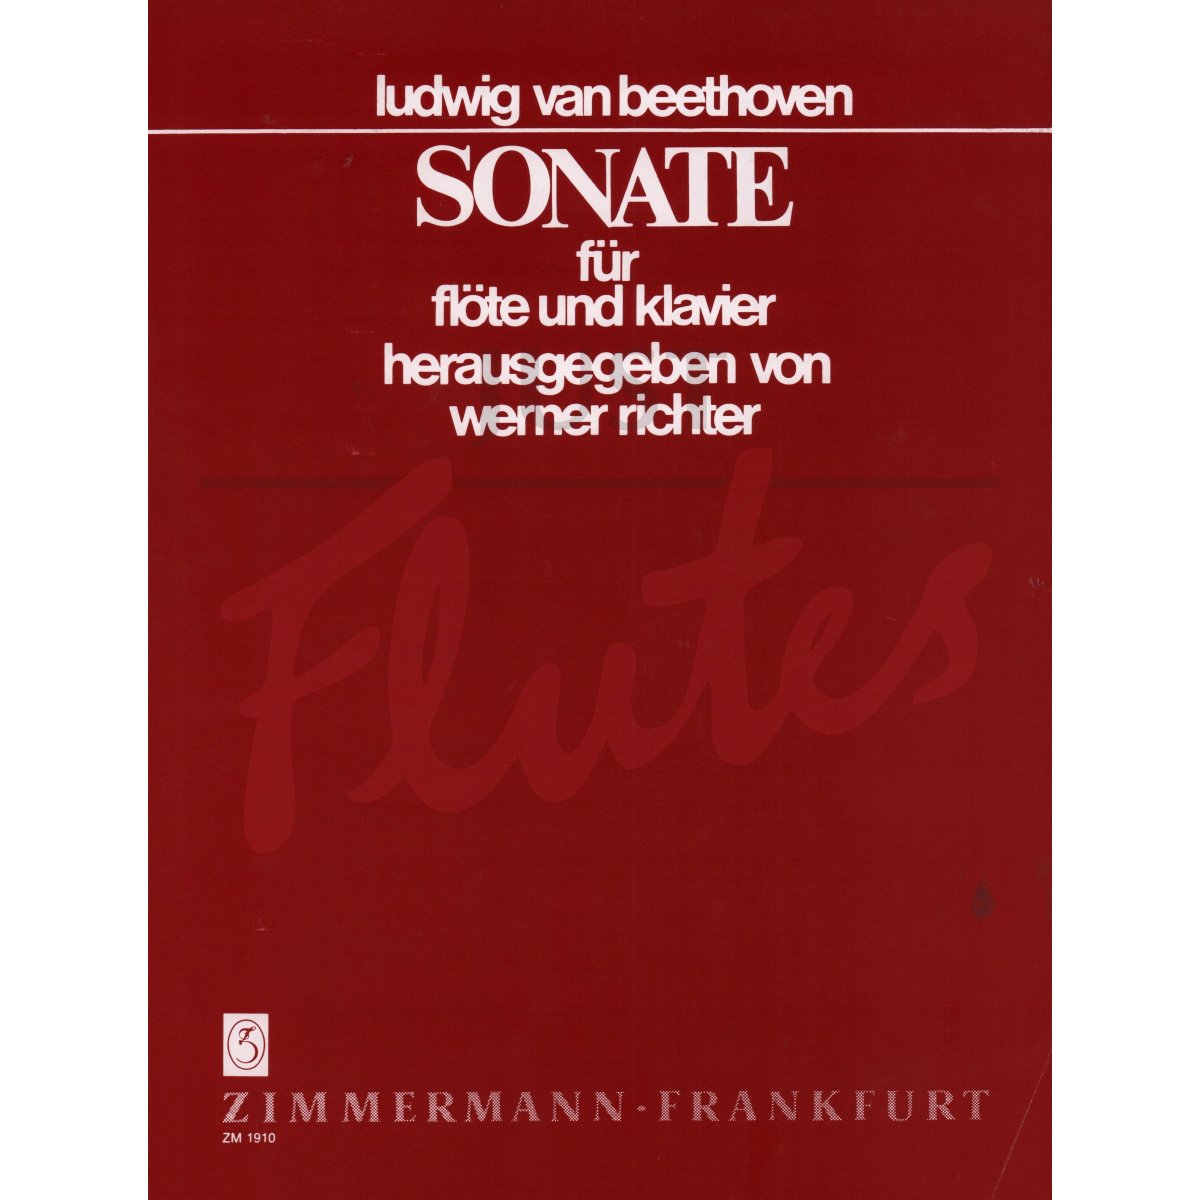 Sonata in B flat major for Flute and Piano